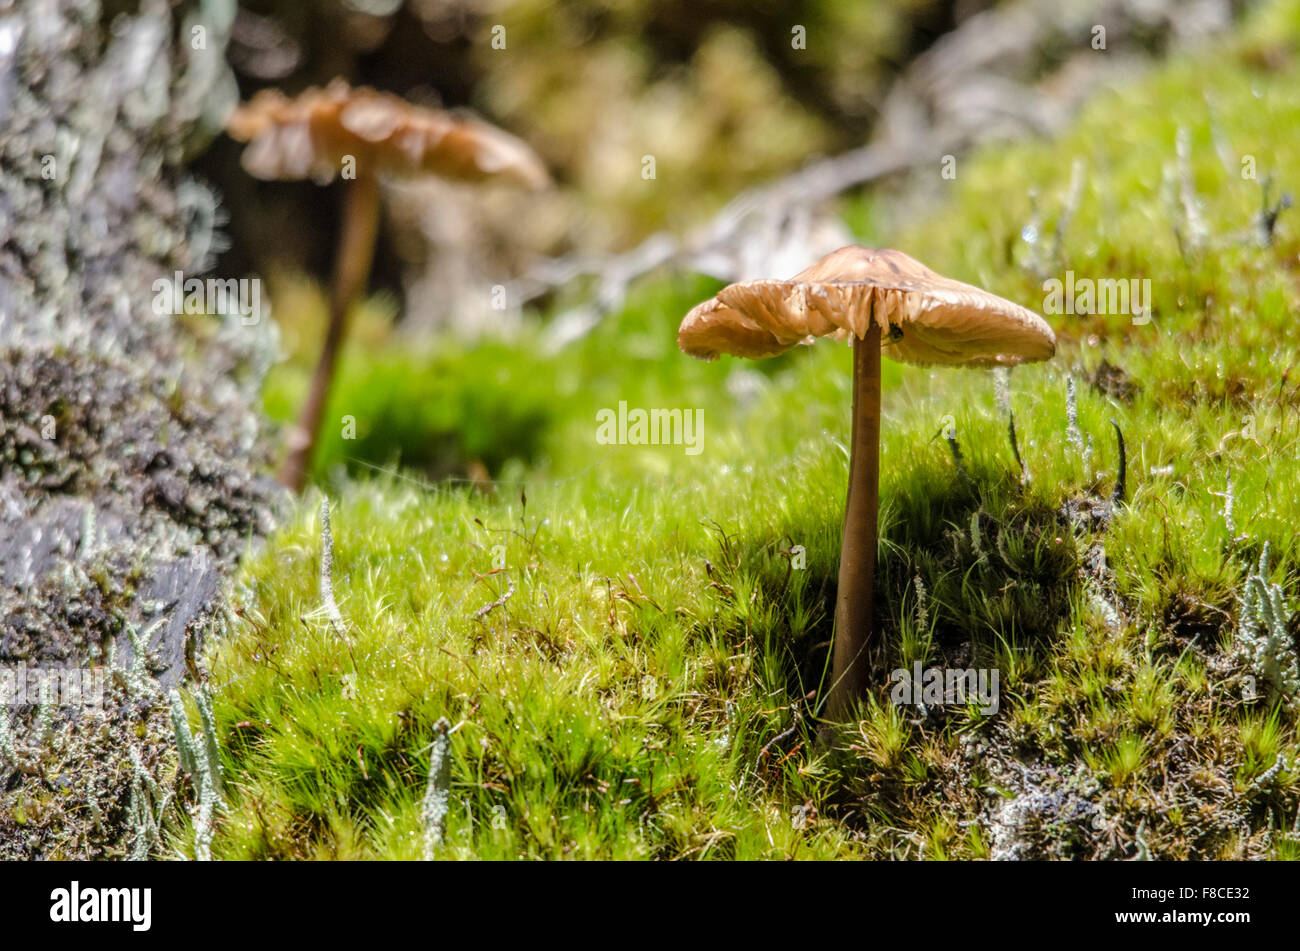 Mushroom growing in a bed of moss in the cloud forests of the Yanacocha Reserve near Quito, Ecuador. Stock Photo